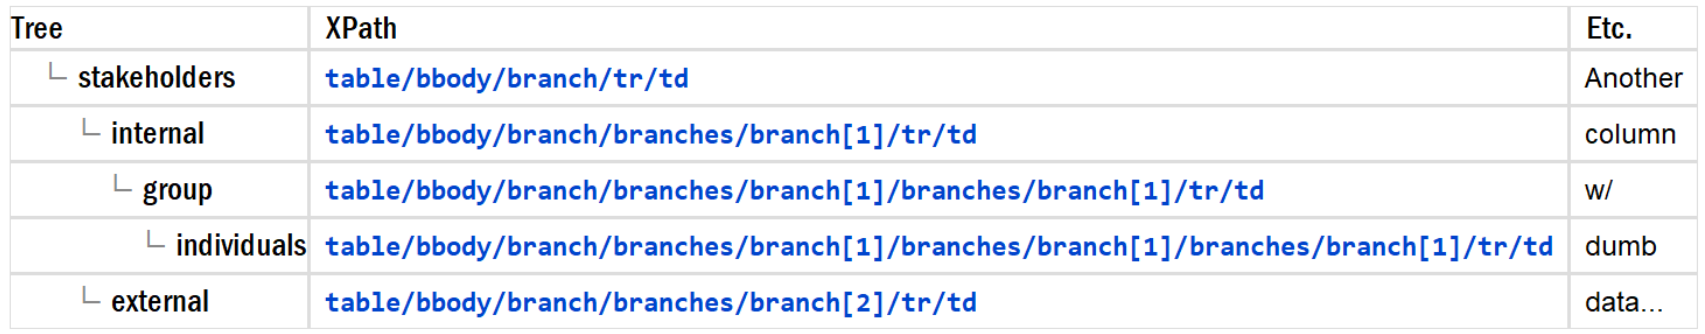 Column one shows indentation to match the nested branches. Column two, the XPath. Column three, nothing important.